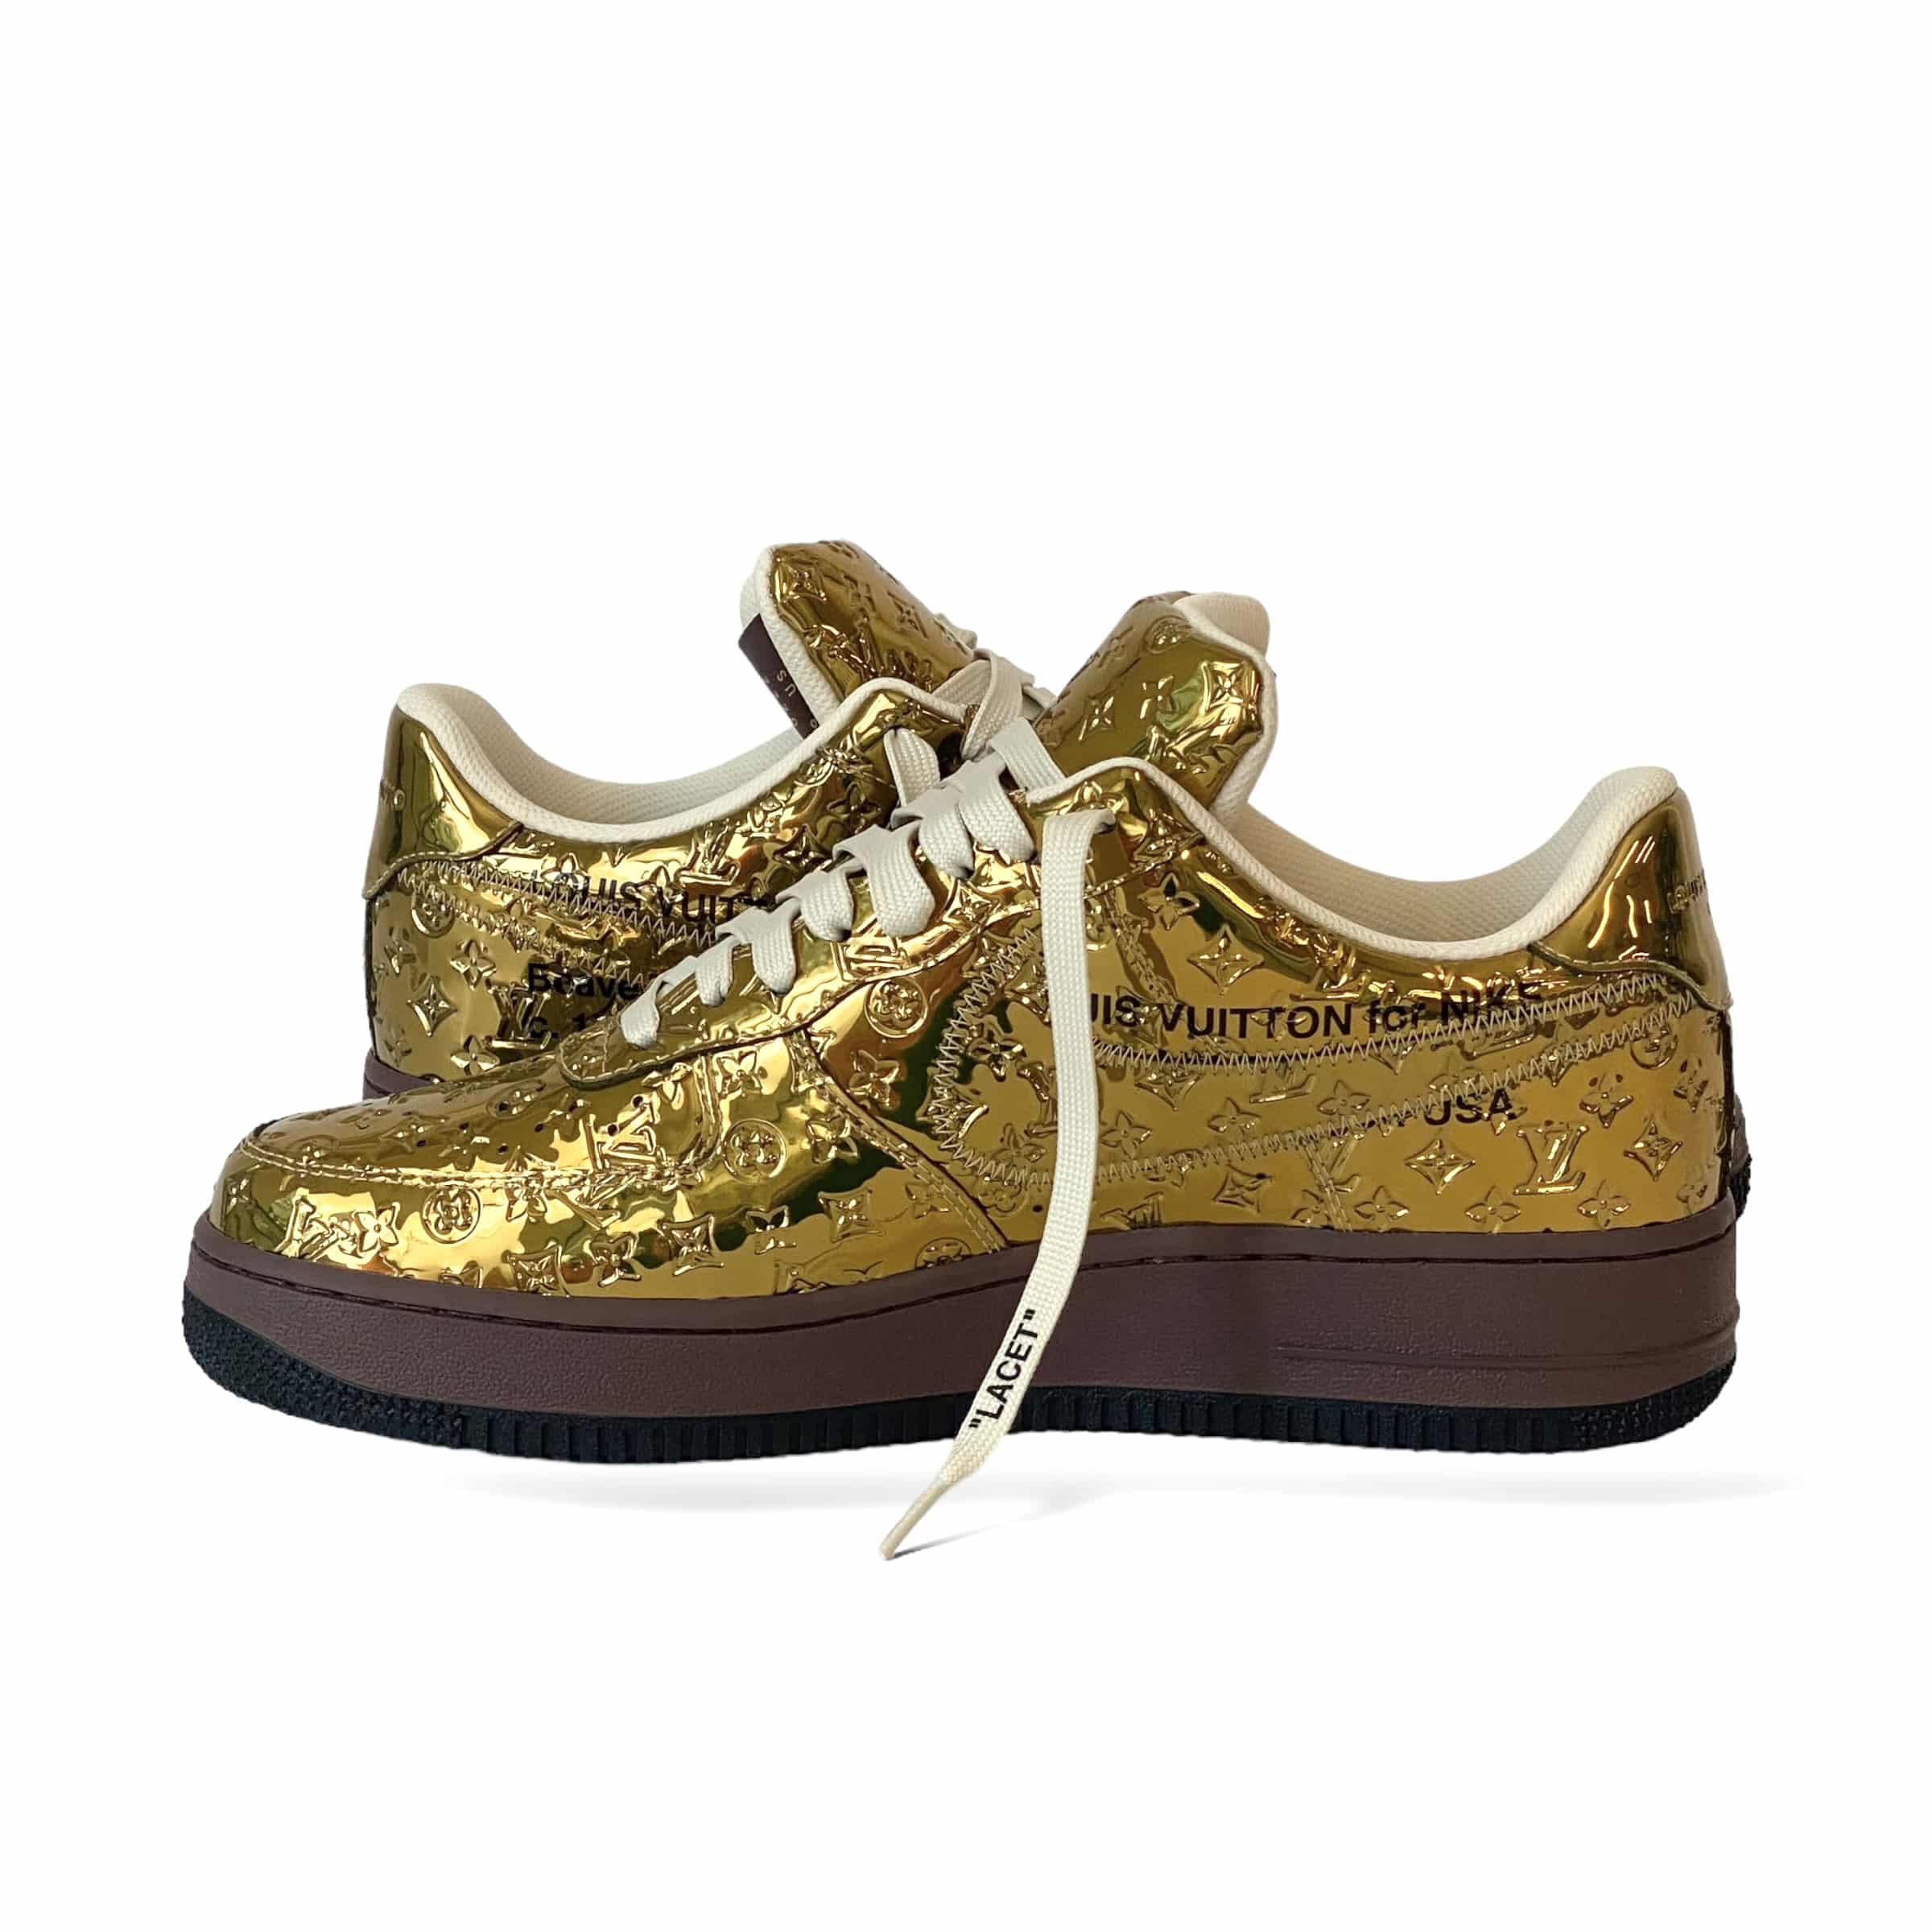 Louis Vuitton x Nike Air Force 1 Sneakers Size 42 EU - The Luxury Flavor